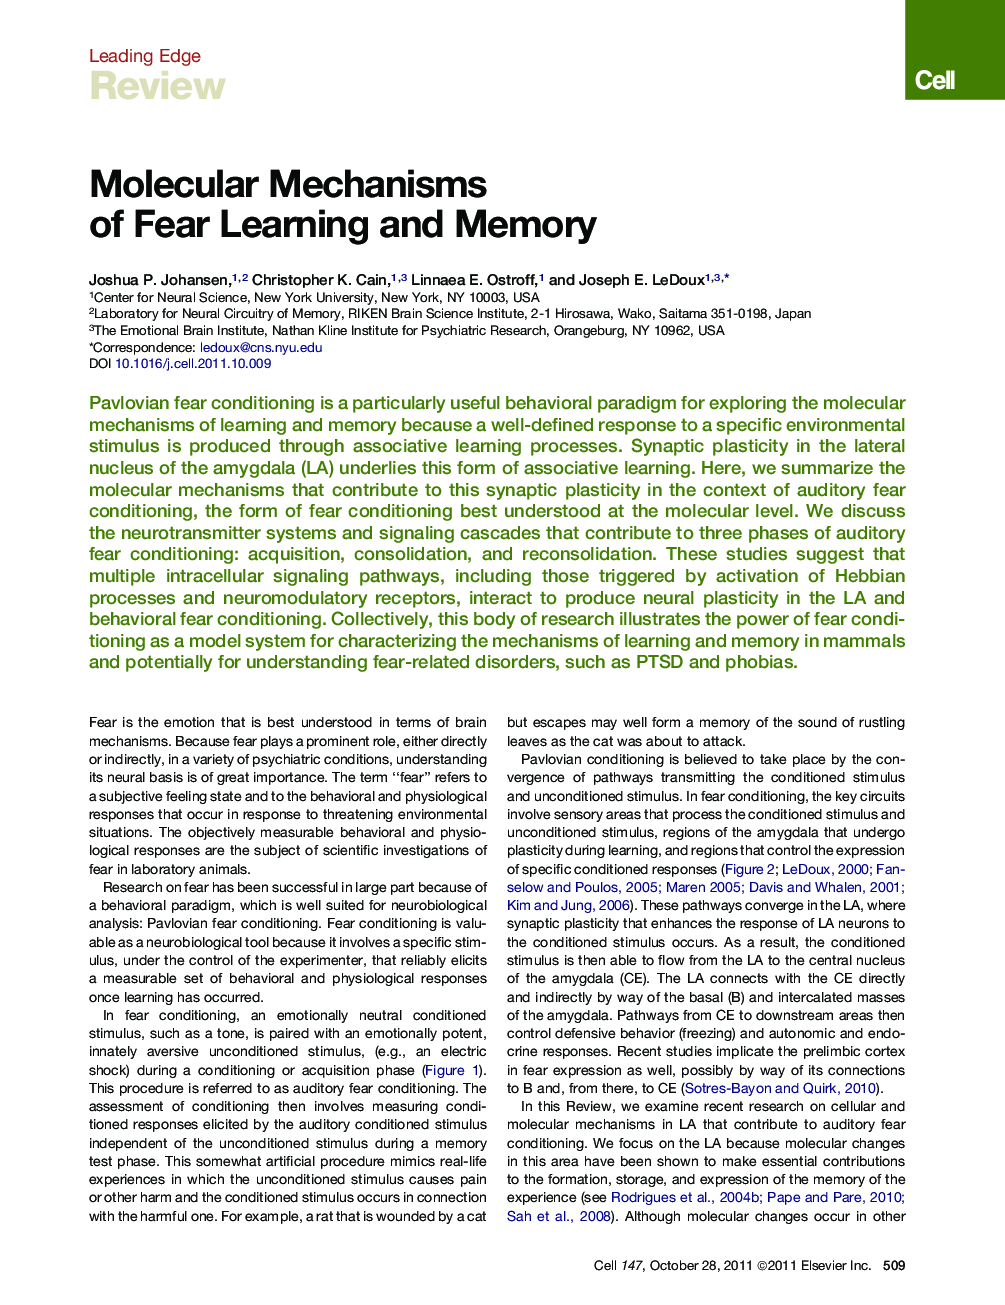 Molecular Mechanisms of Fear Learning and Memory